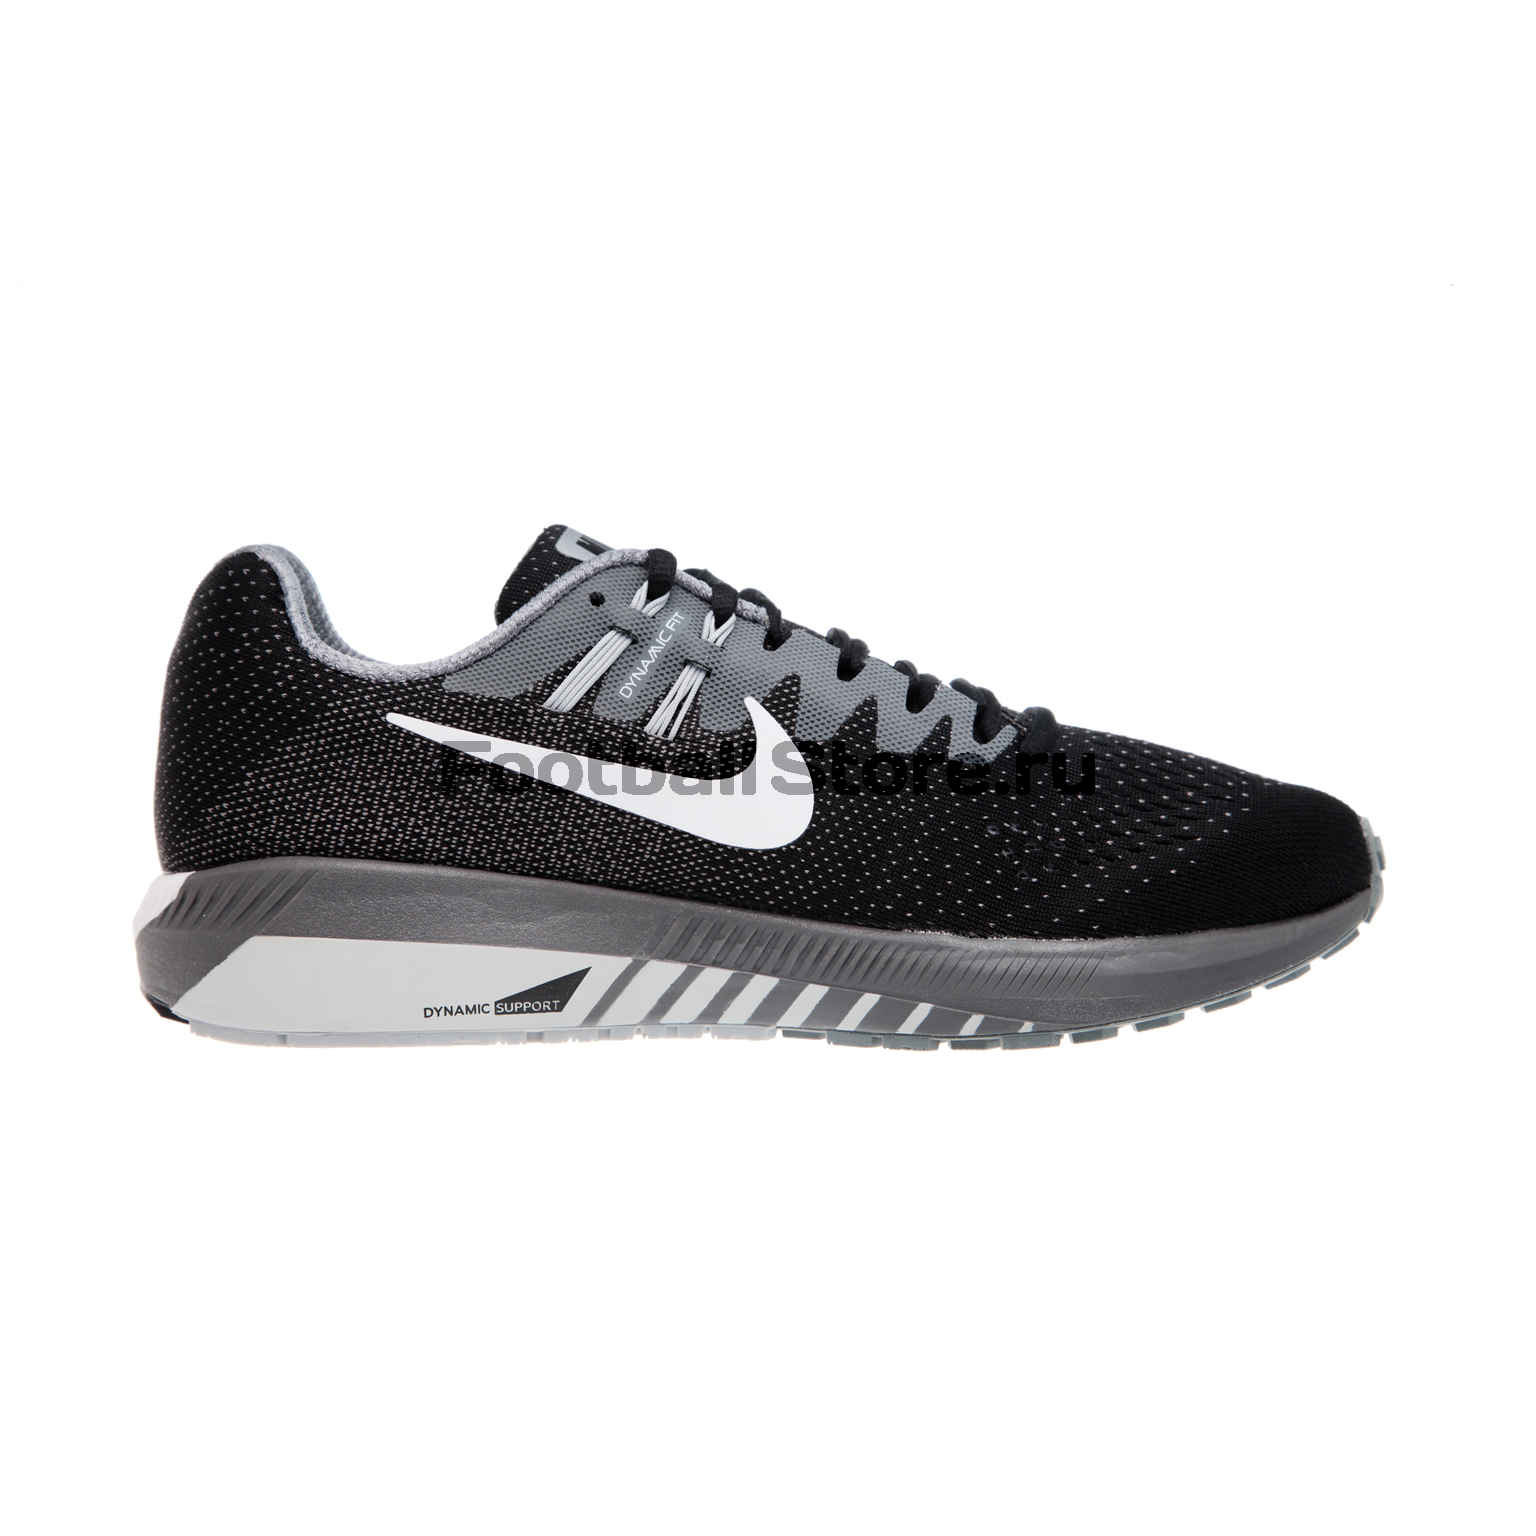 Кроссовки Nike Air Zoom Structure 20 849576-003